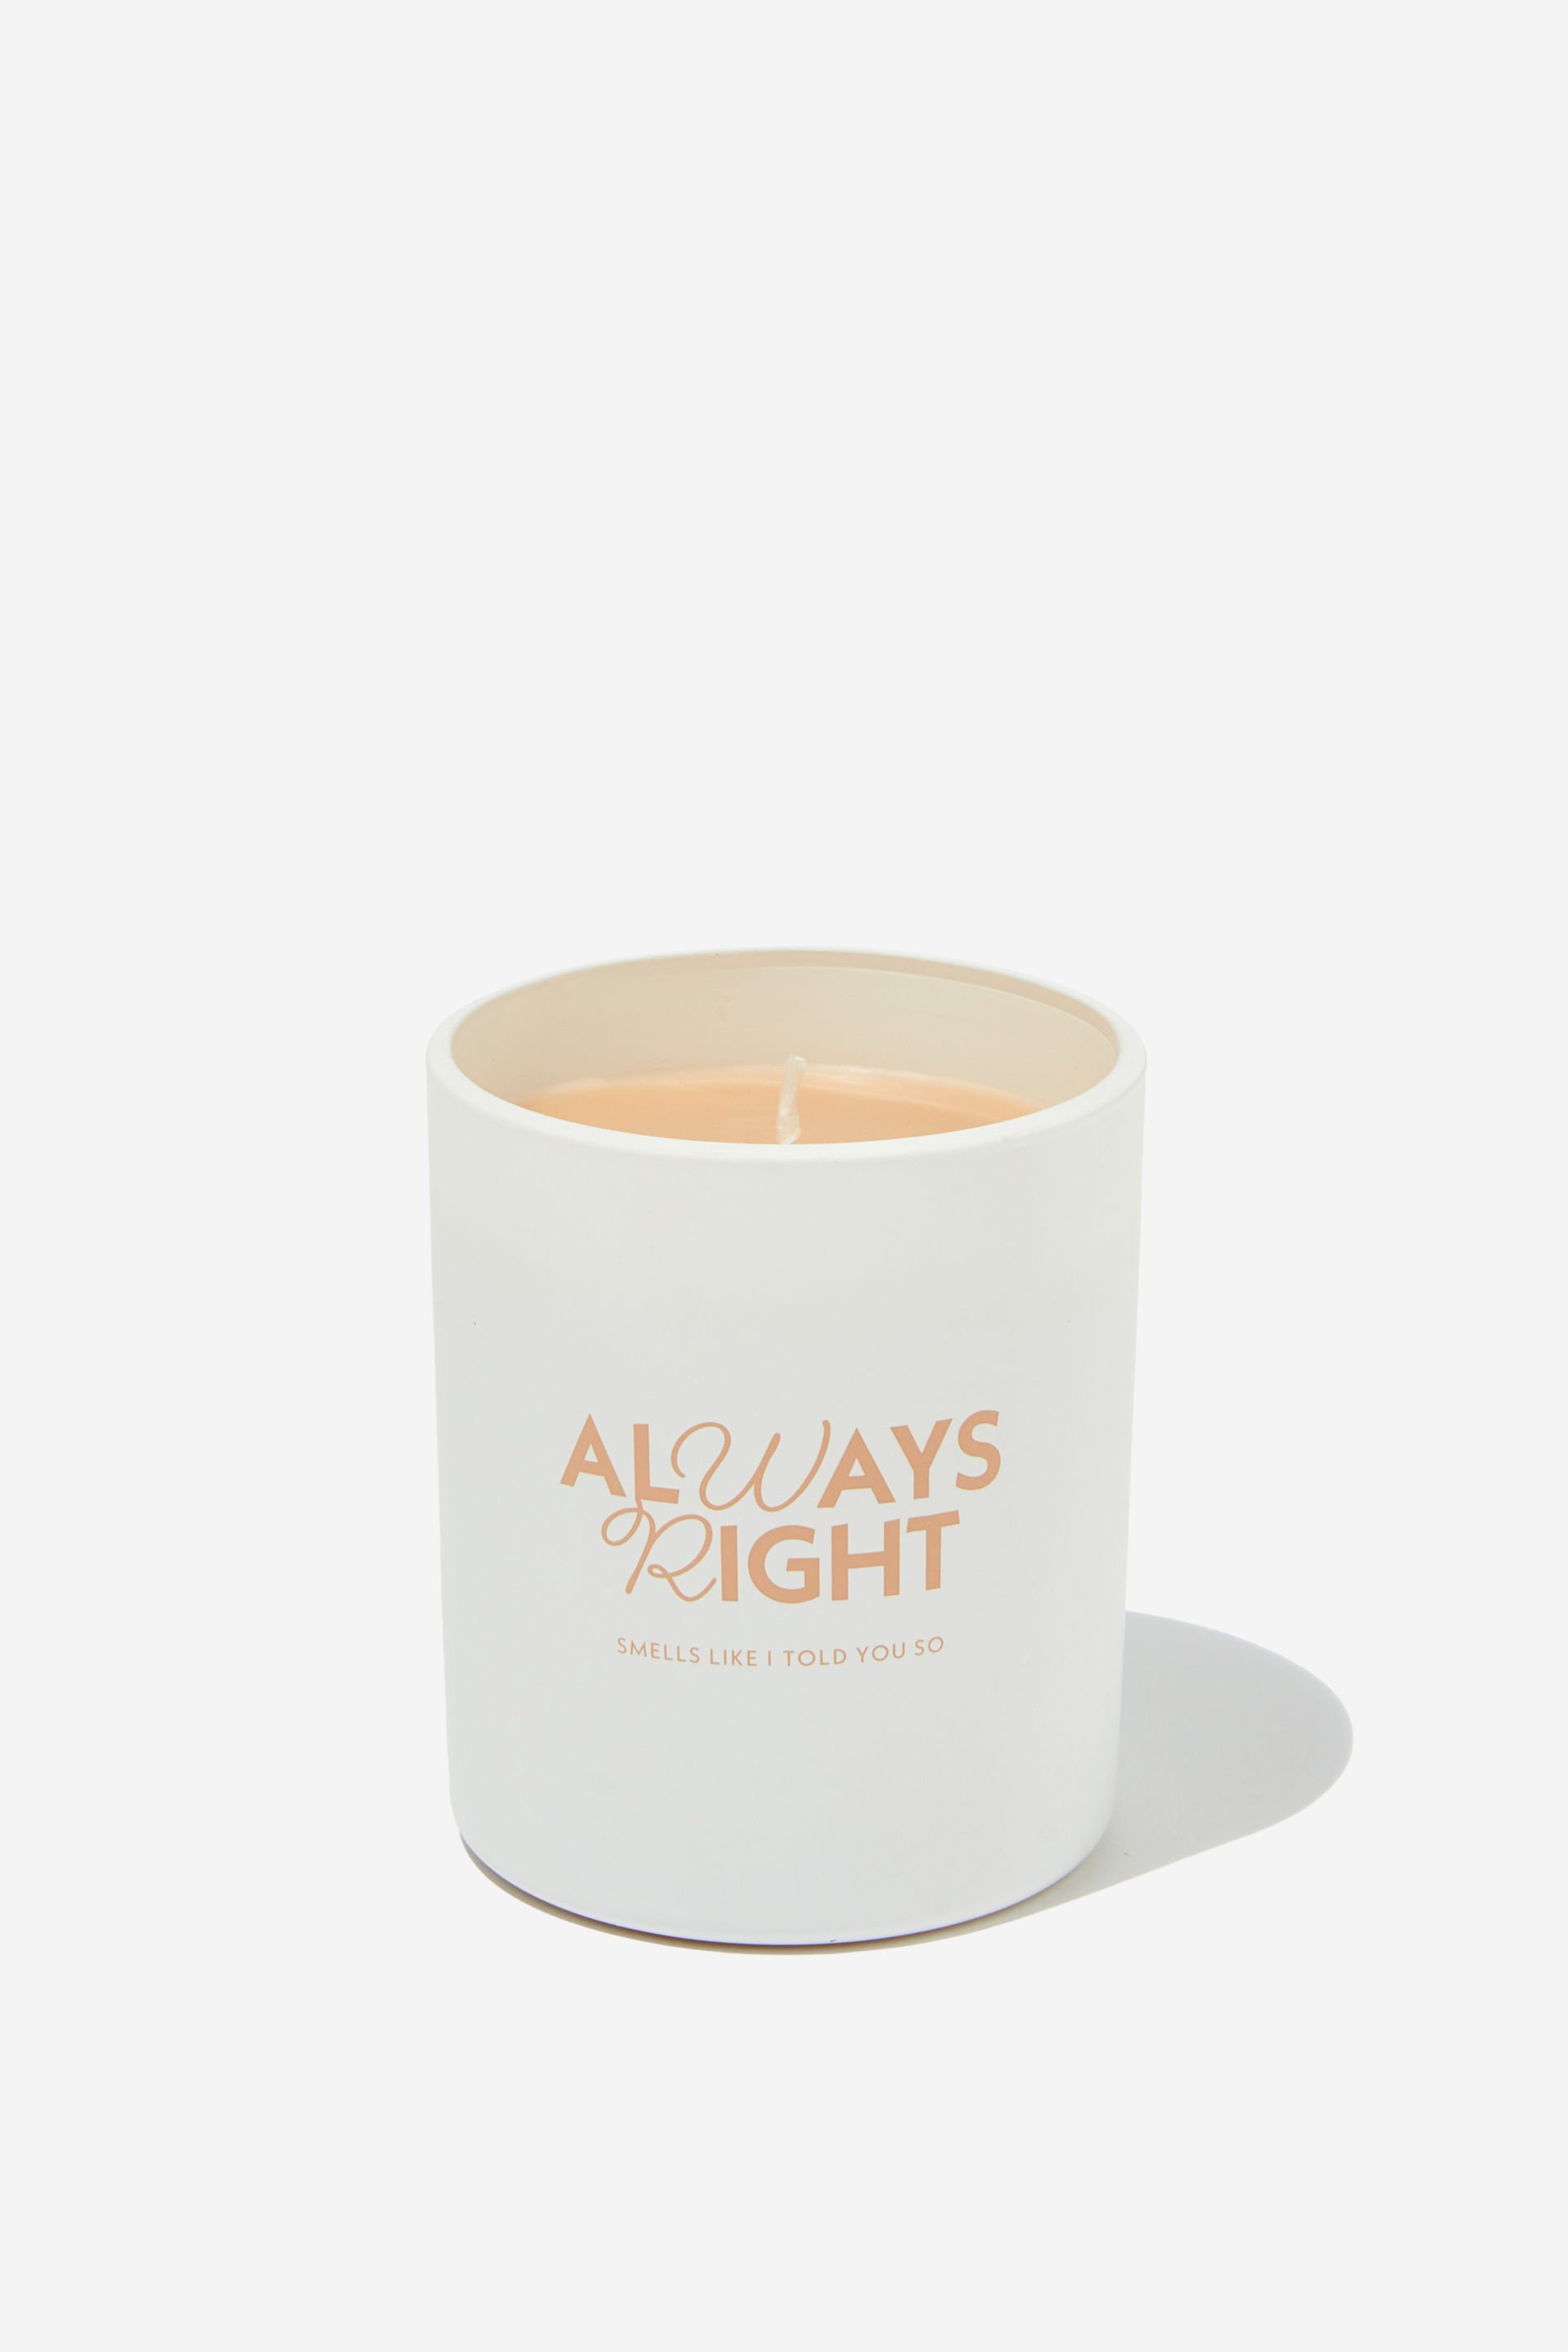 Typo - Tell It Like It Is Candle - Latte always right